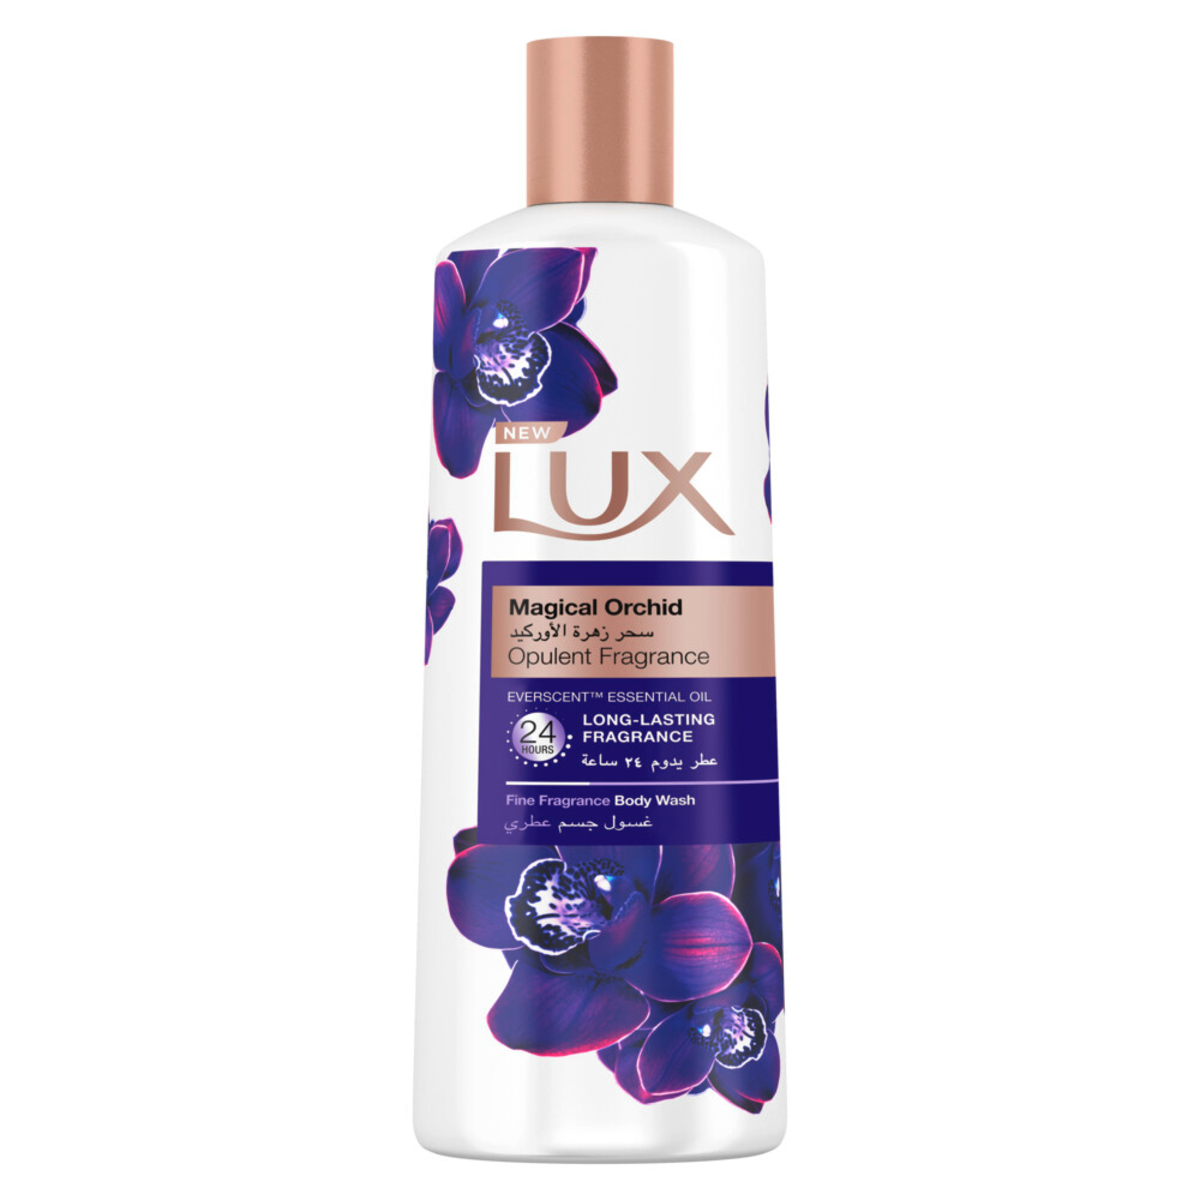 Lux Body Wash Magical Orchid Opulent Fragrance 250 ml